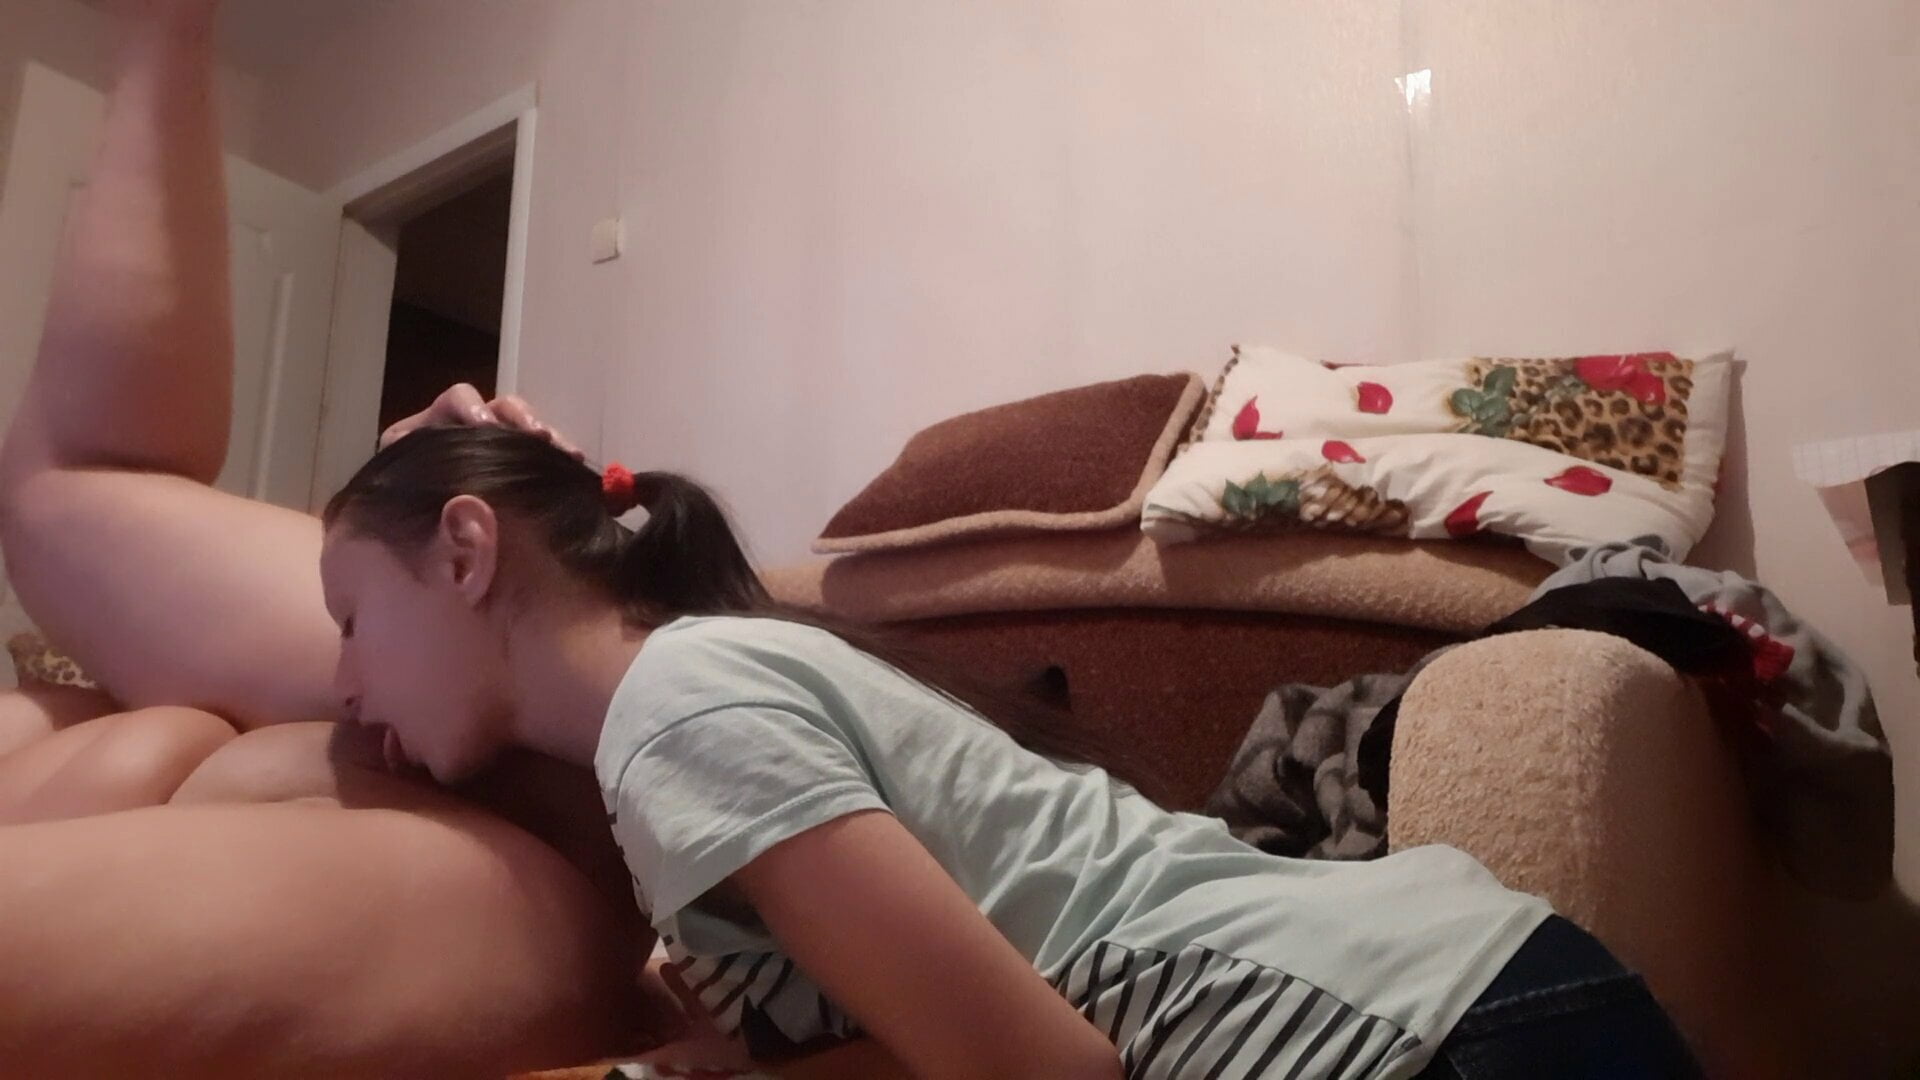 Licked Pussy Until I Cum Then Licked Feet - Lesbian-candys